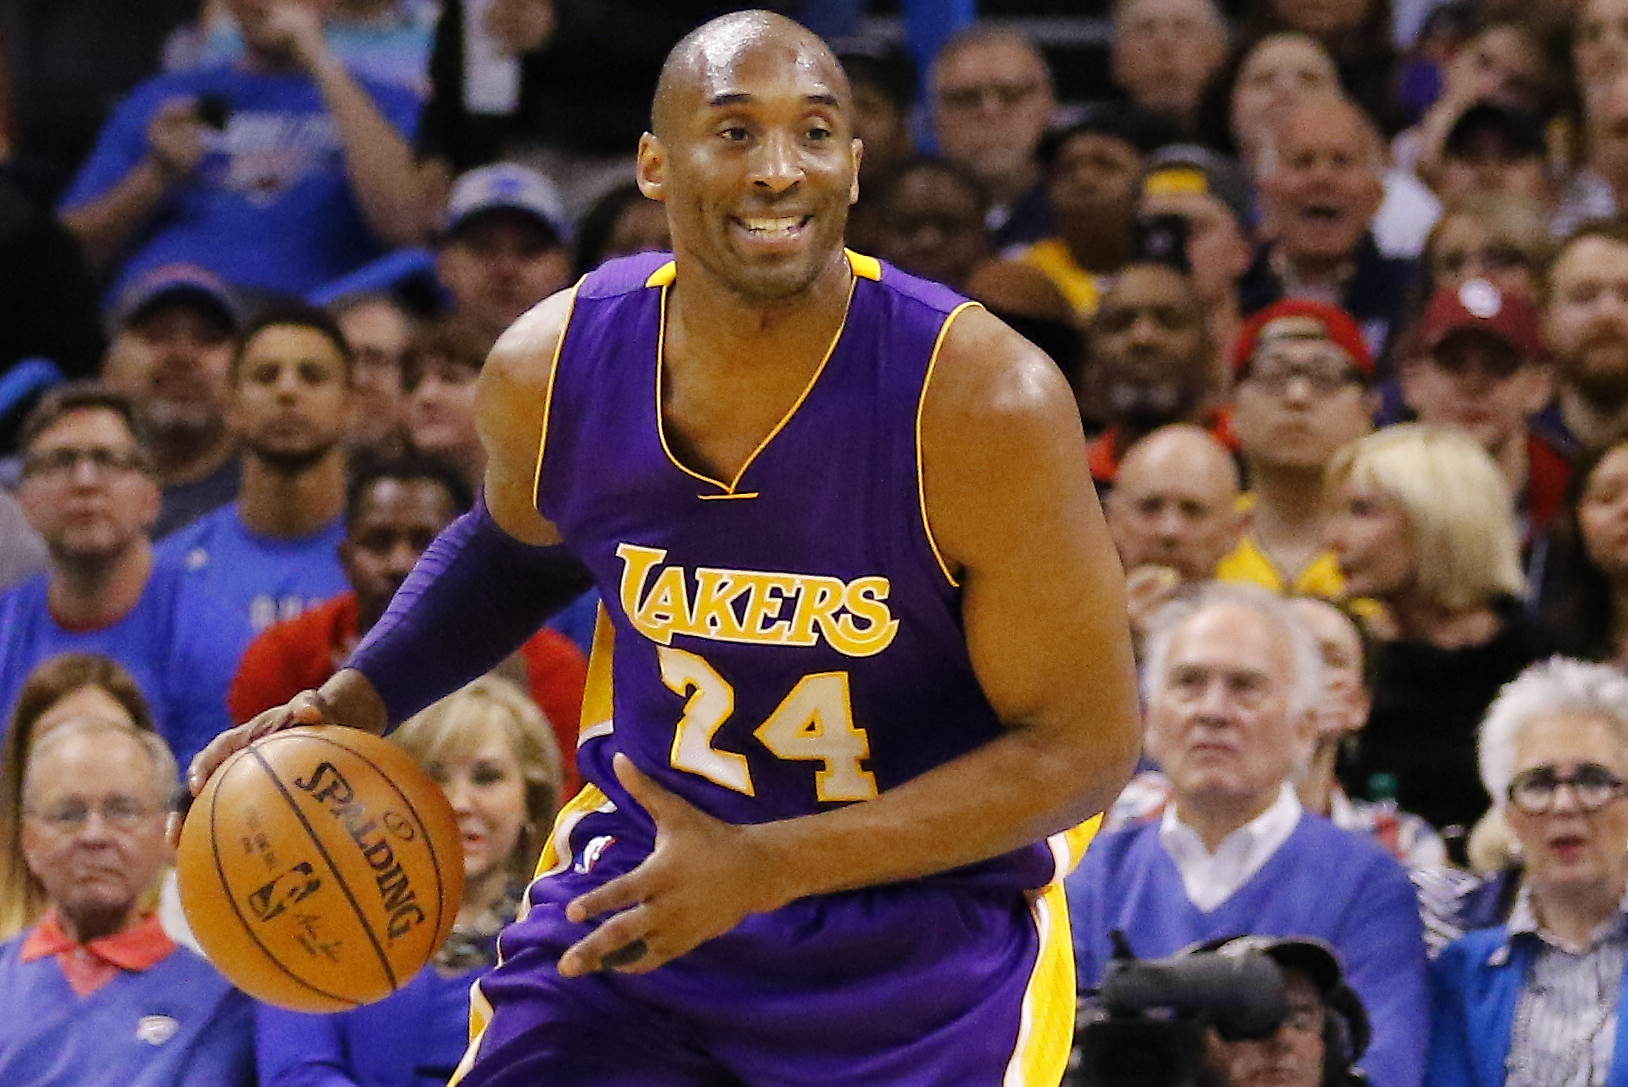 Lakers will reportedly retire Kobe Bryant's jersey on Dec. 18